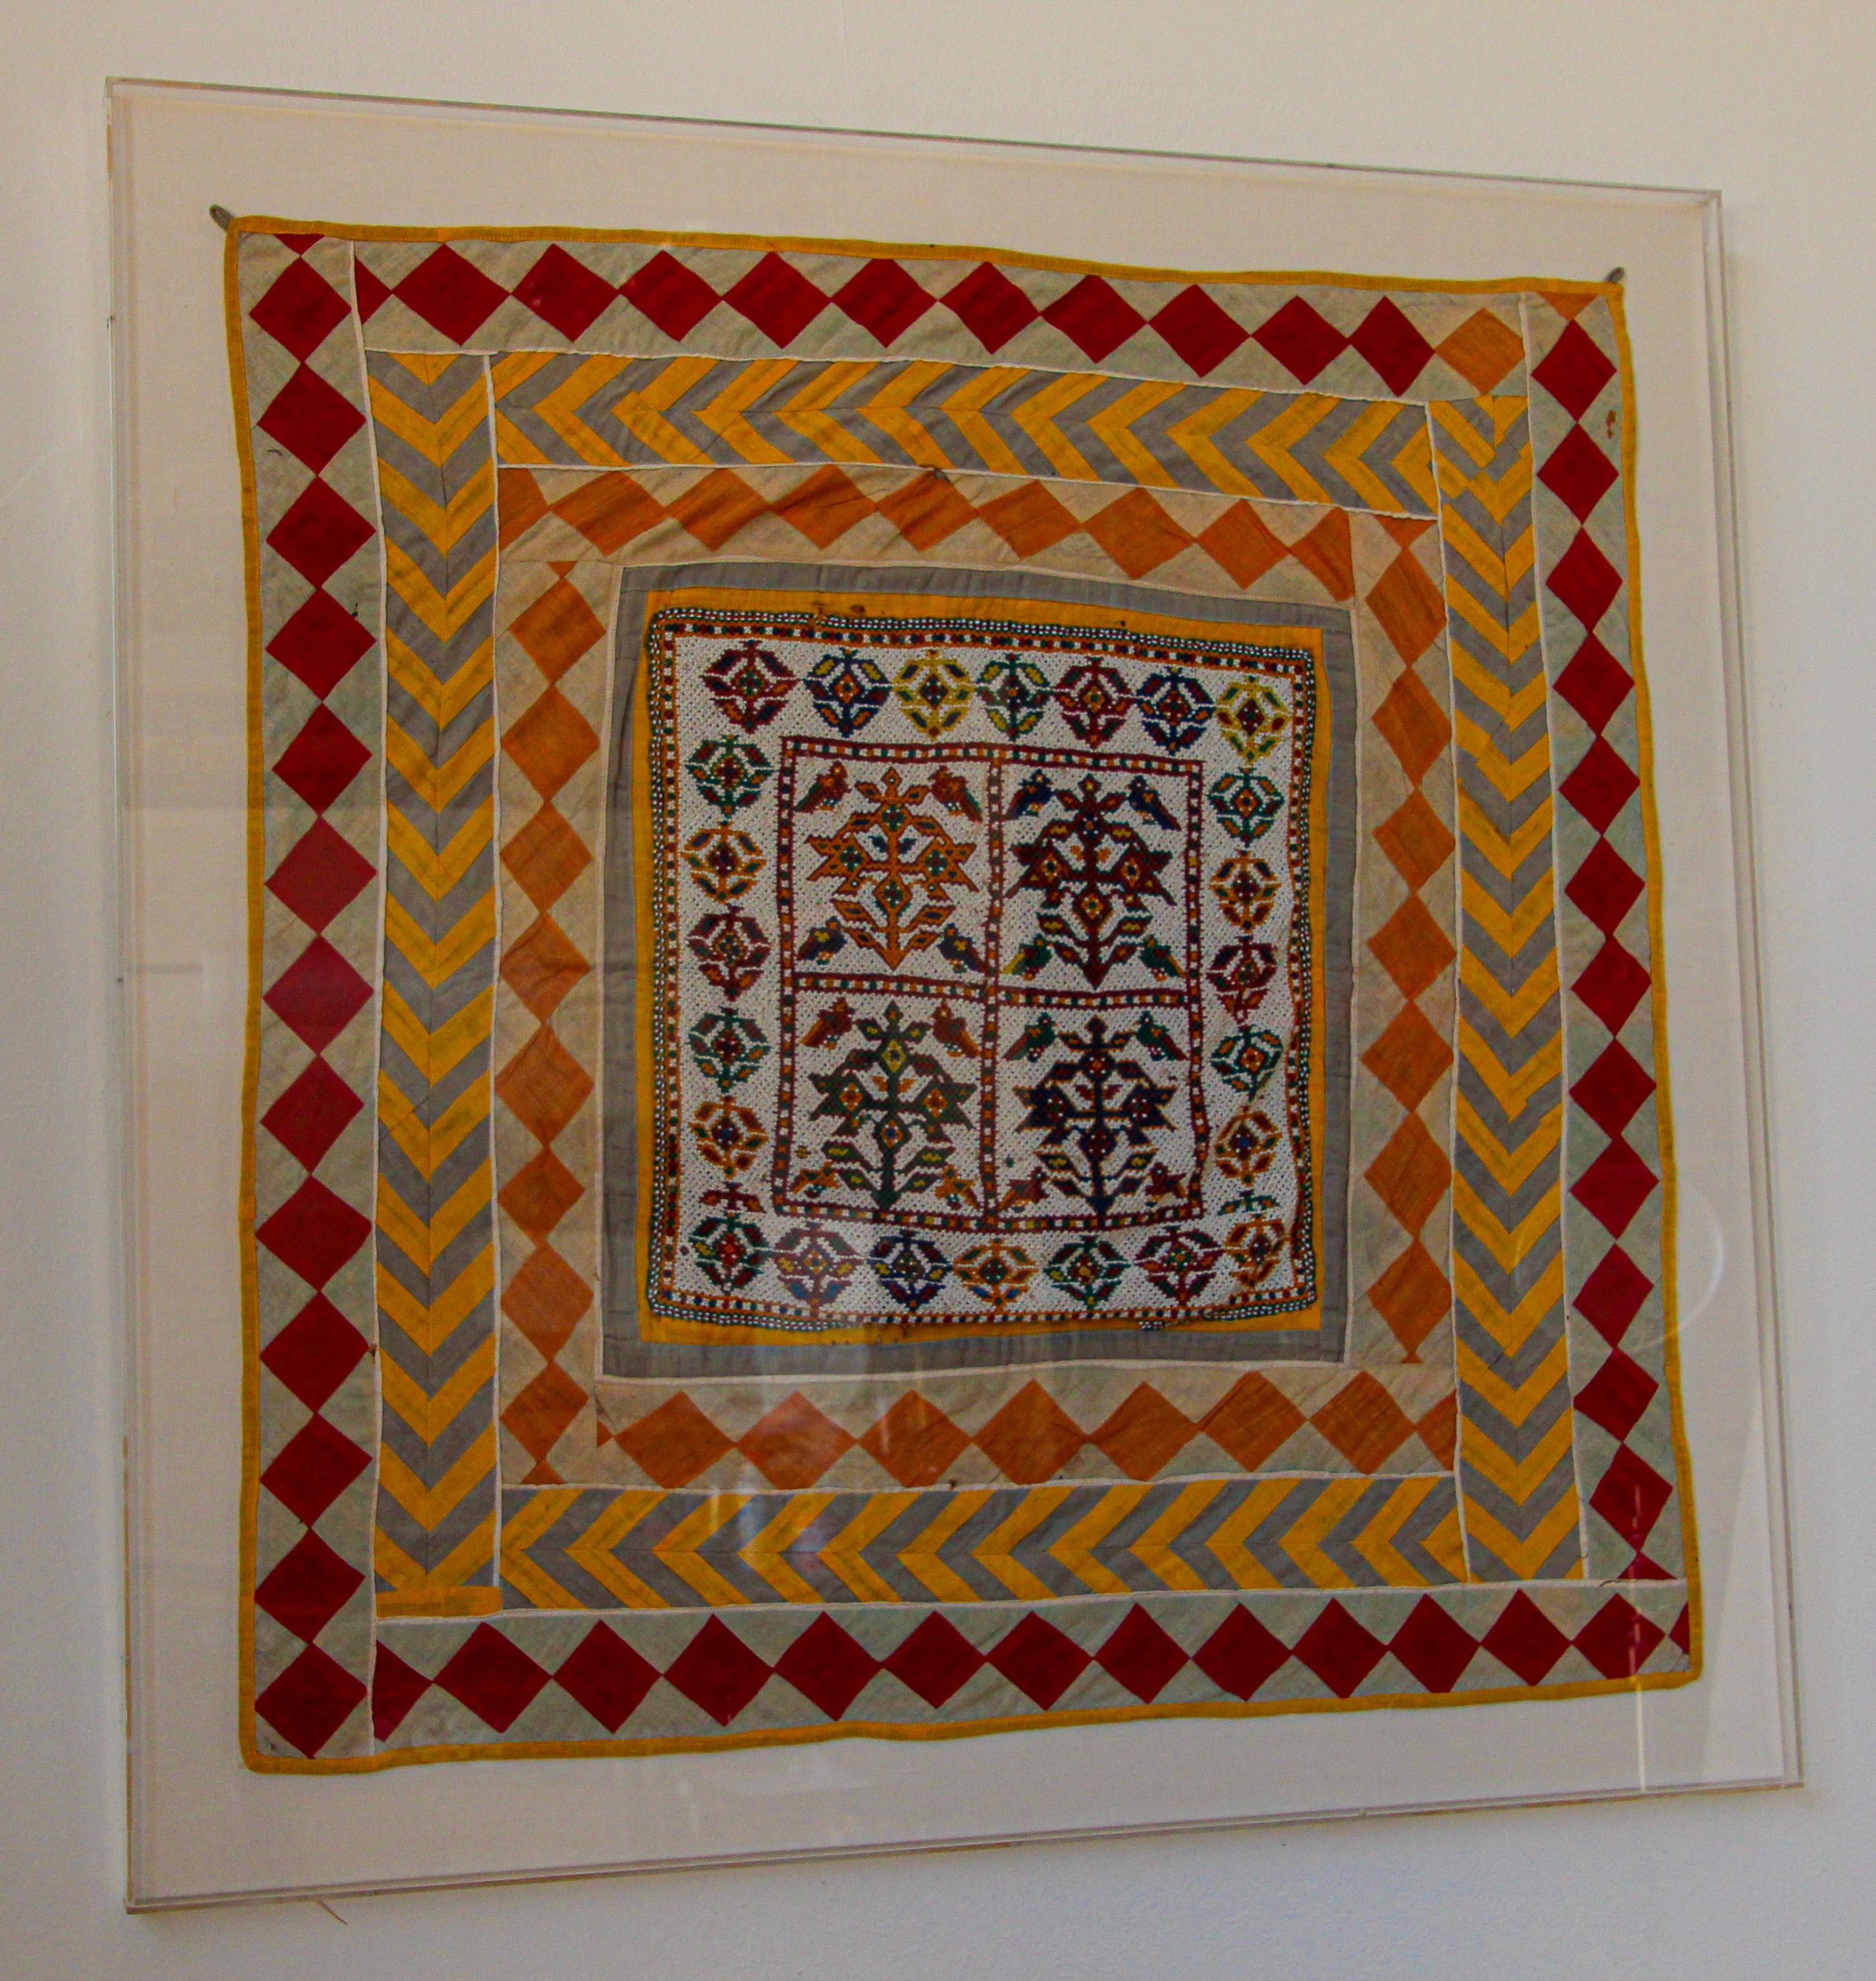 Vintage hand made Gujarat Saurashta Ethnic beadead textile India.
Hand Beaded Guarat Indian panel textile framed in a lucite box.
Amazing work of hand beading by Chakla Indian, Gujarat state, Saurashtra or Kutch region.
Such a nice piece of